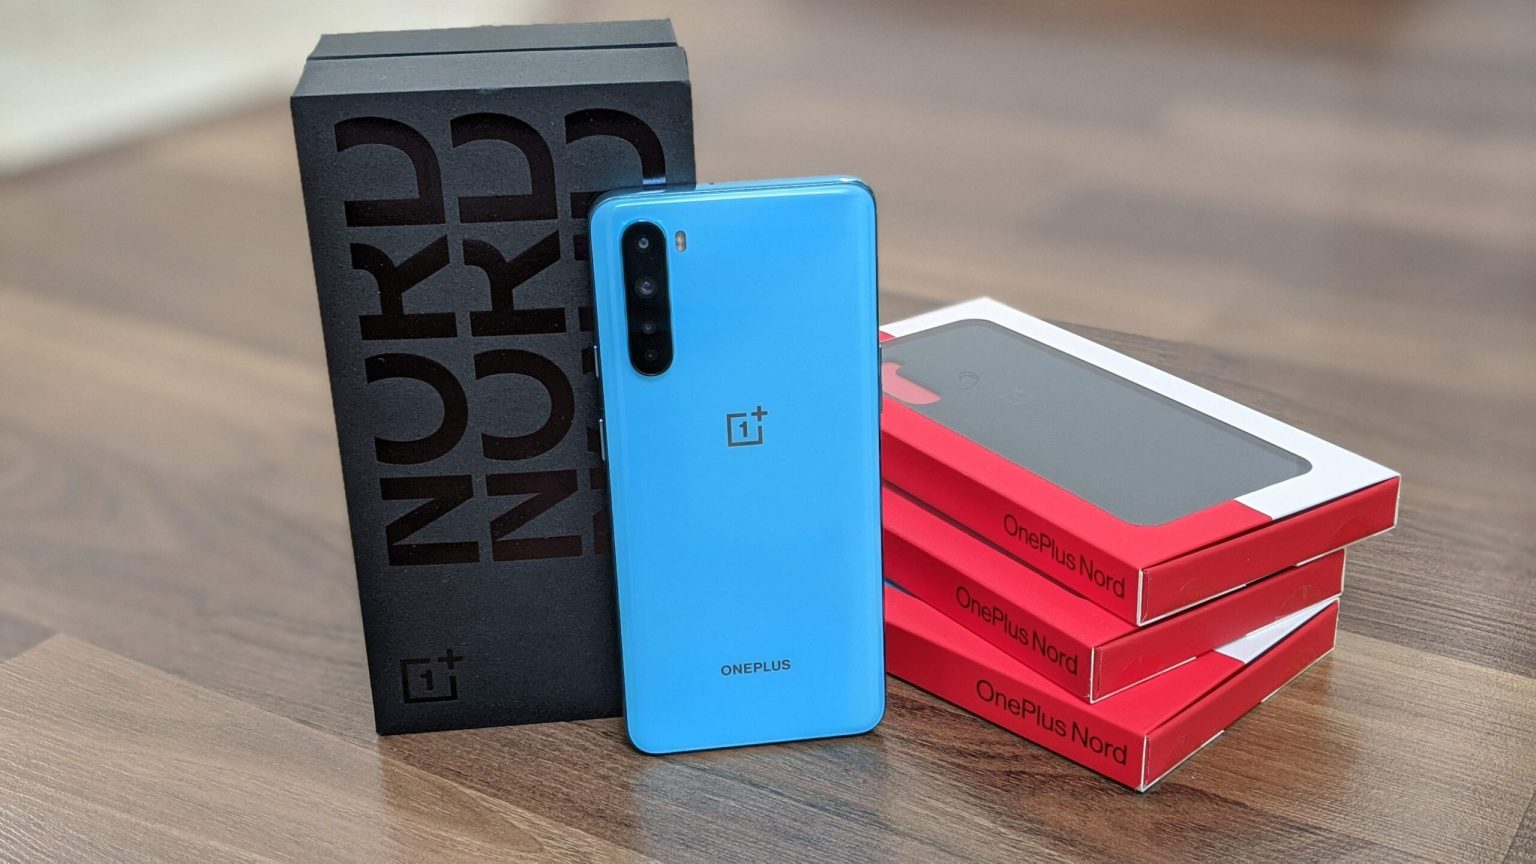 OnePlusNord scaled 1536x864 - OnePlus Nord price in Nigeria and Full Specs